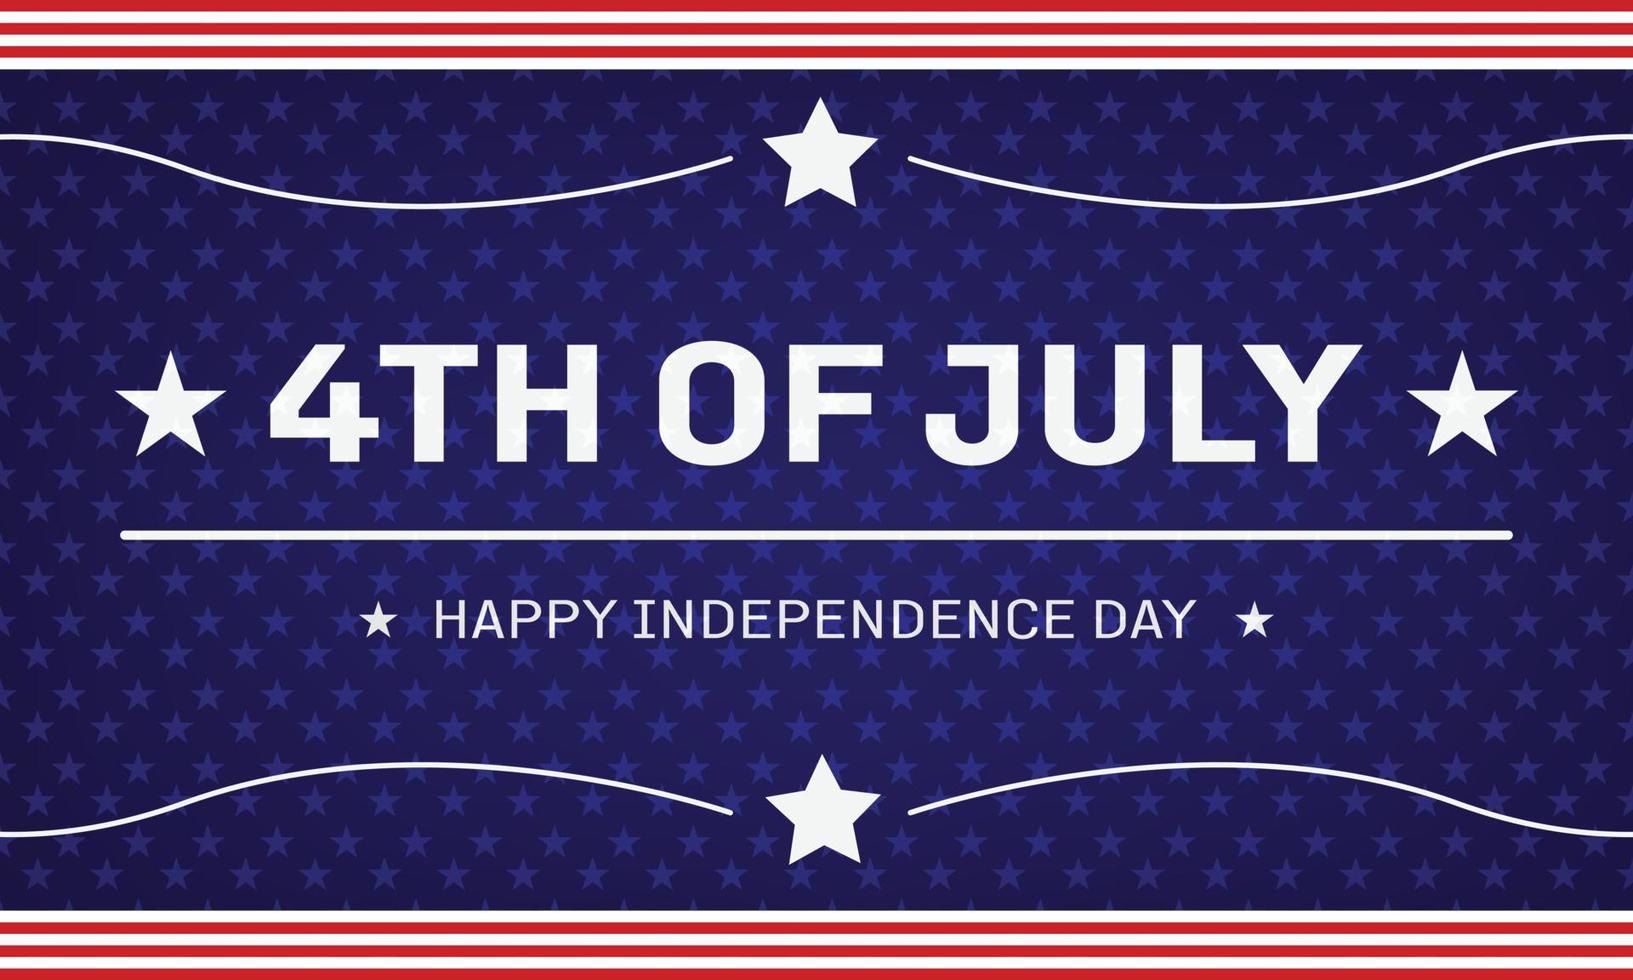 4th of july independence day, Happy Independence day vector